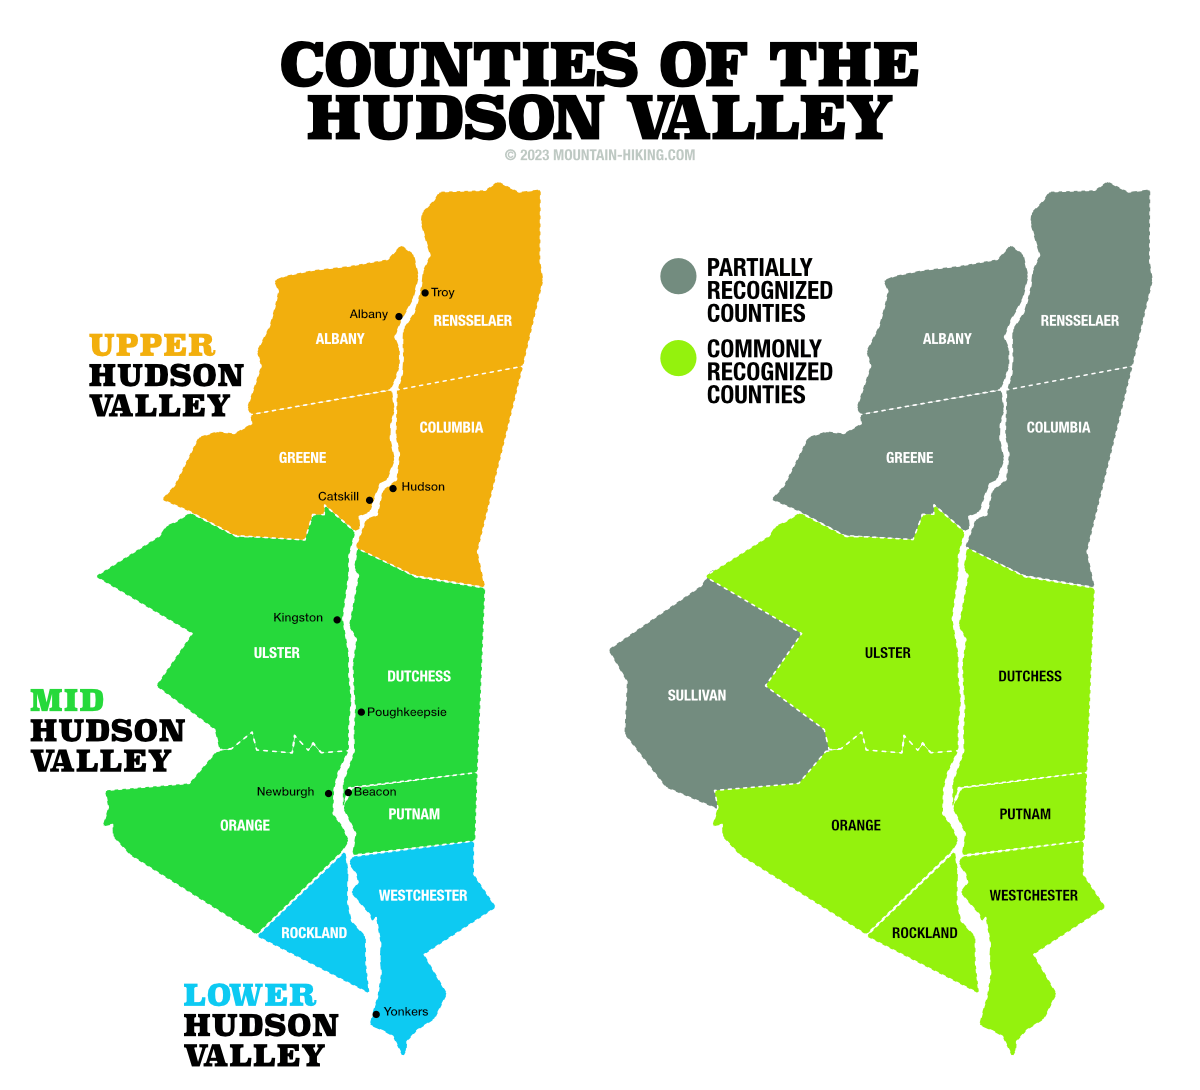 Graphic depicting the counties of the Hudson Valley